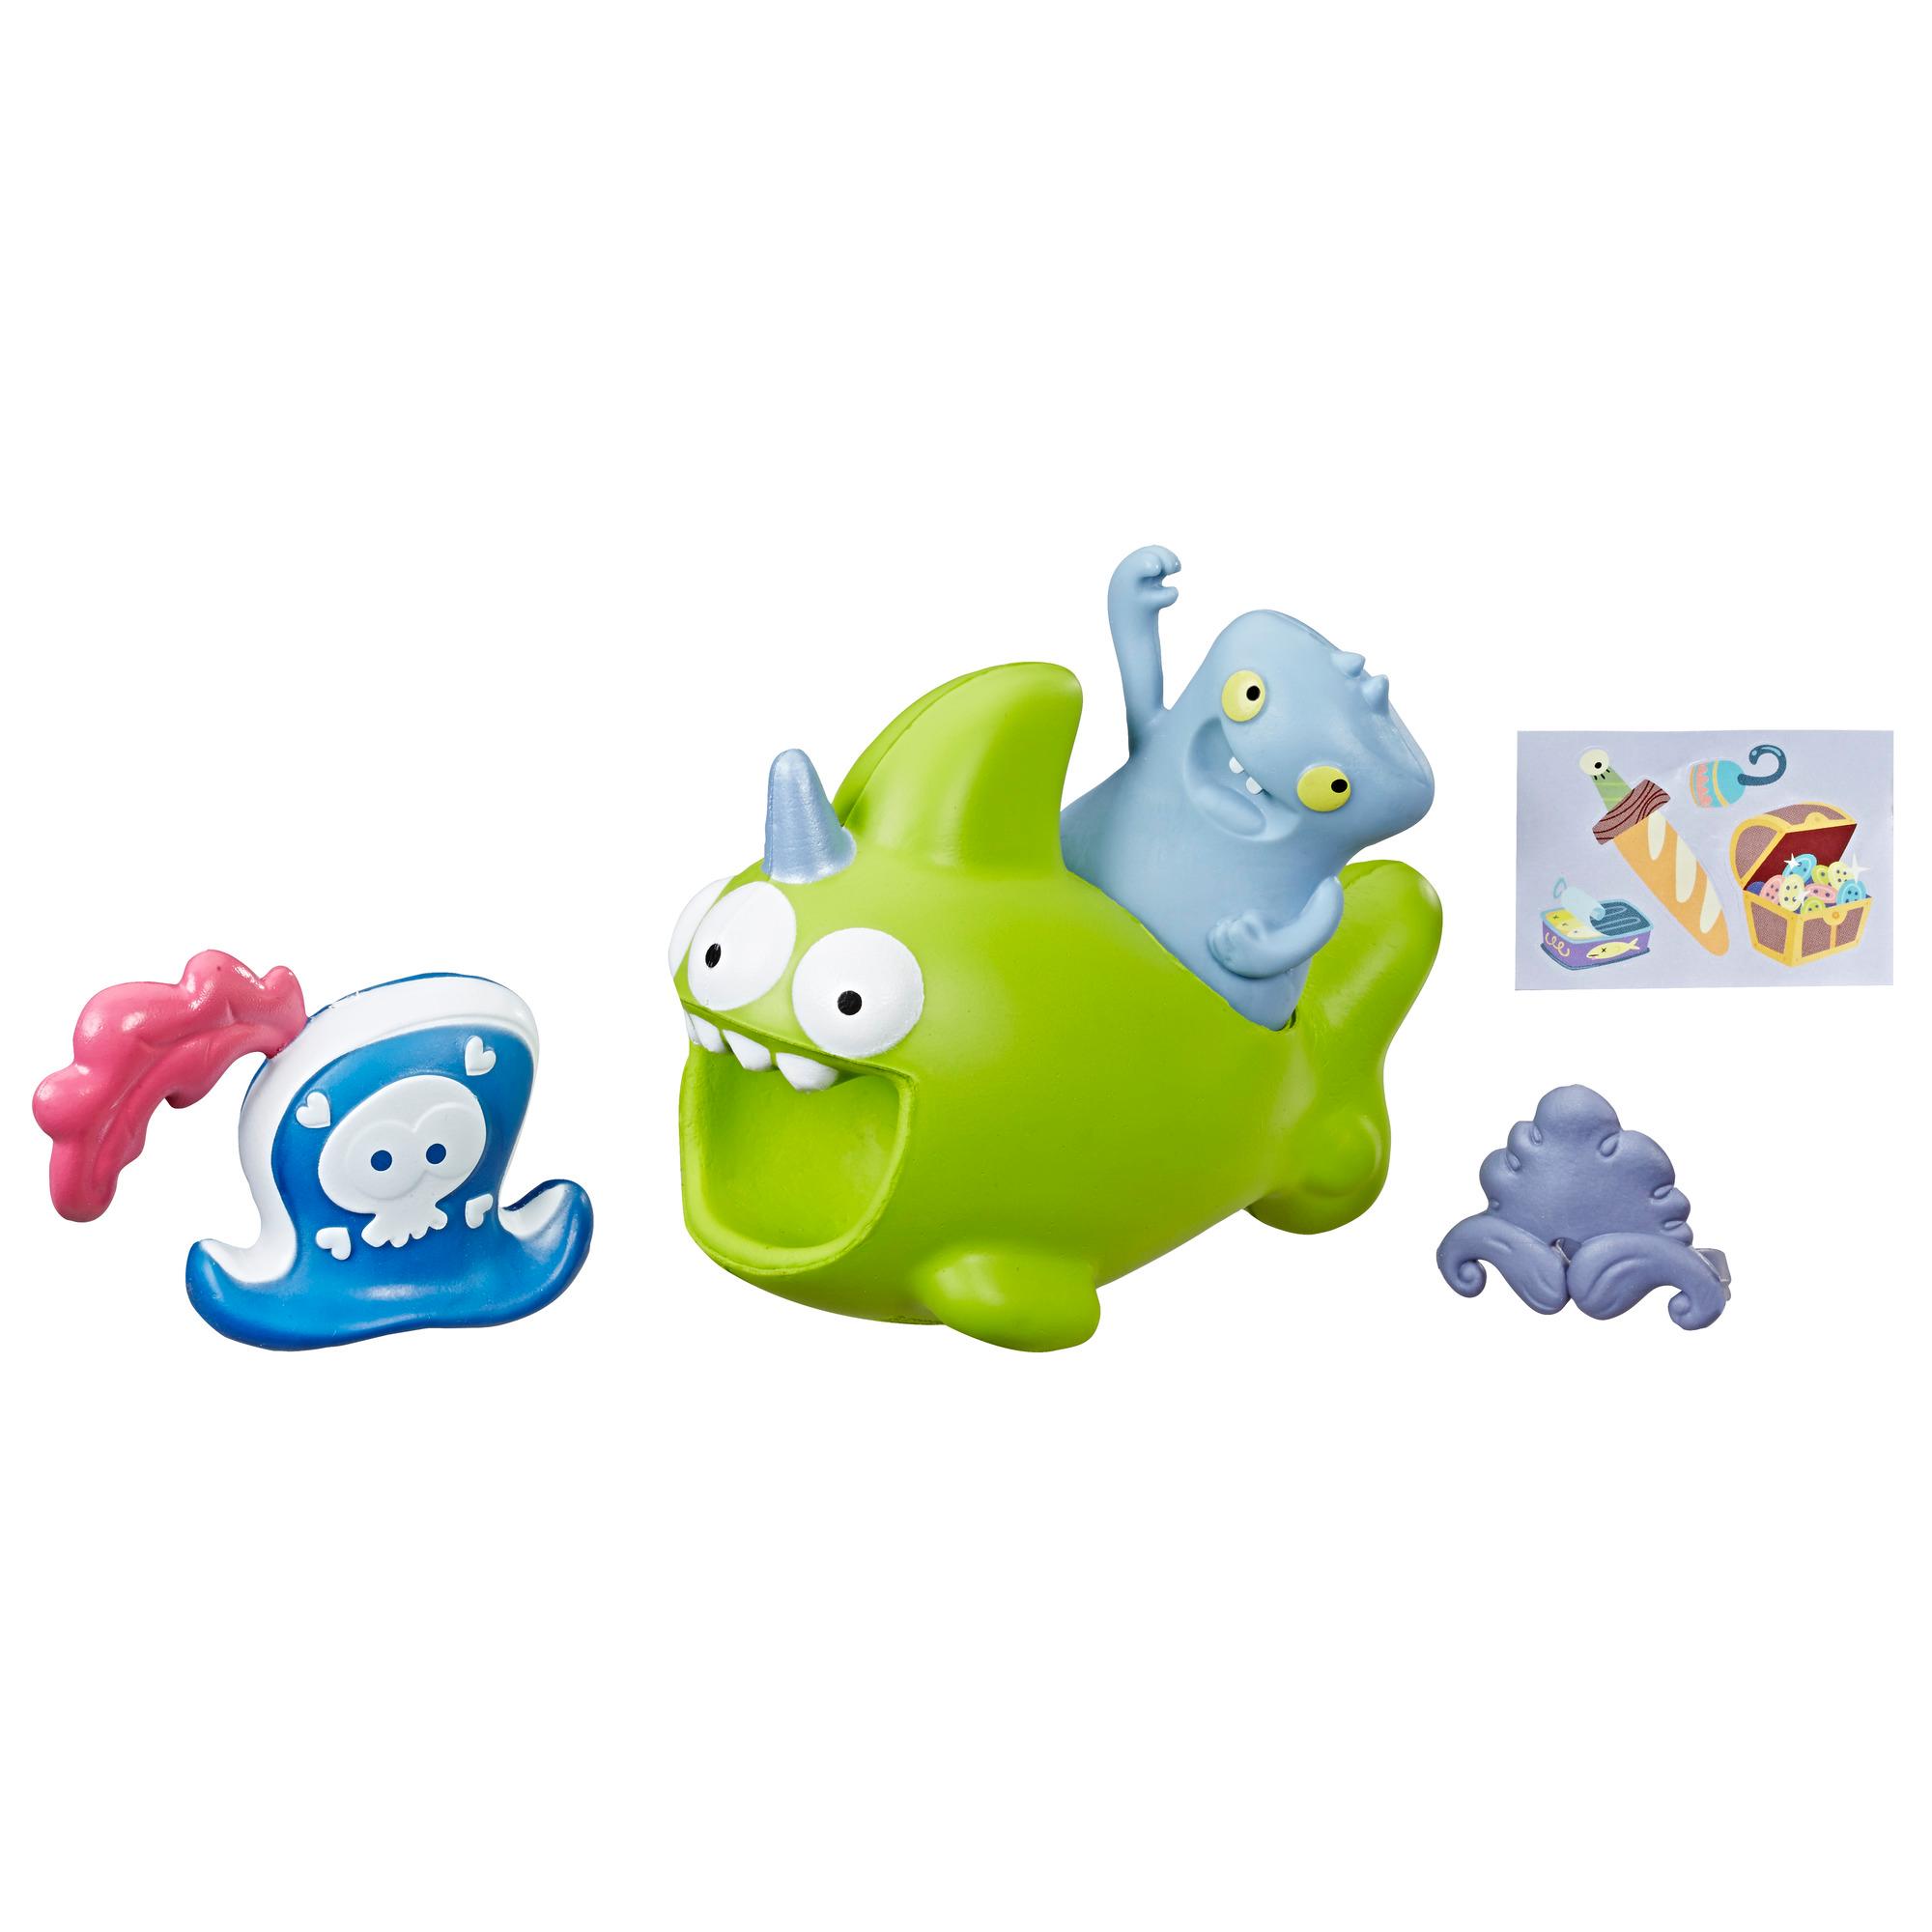 UglyDolls Babo and Squish-and-Go Sharwhal, 2 Toy Figures with Accessories